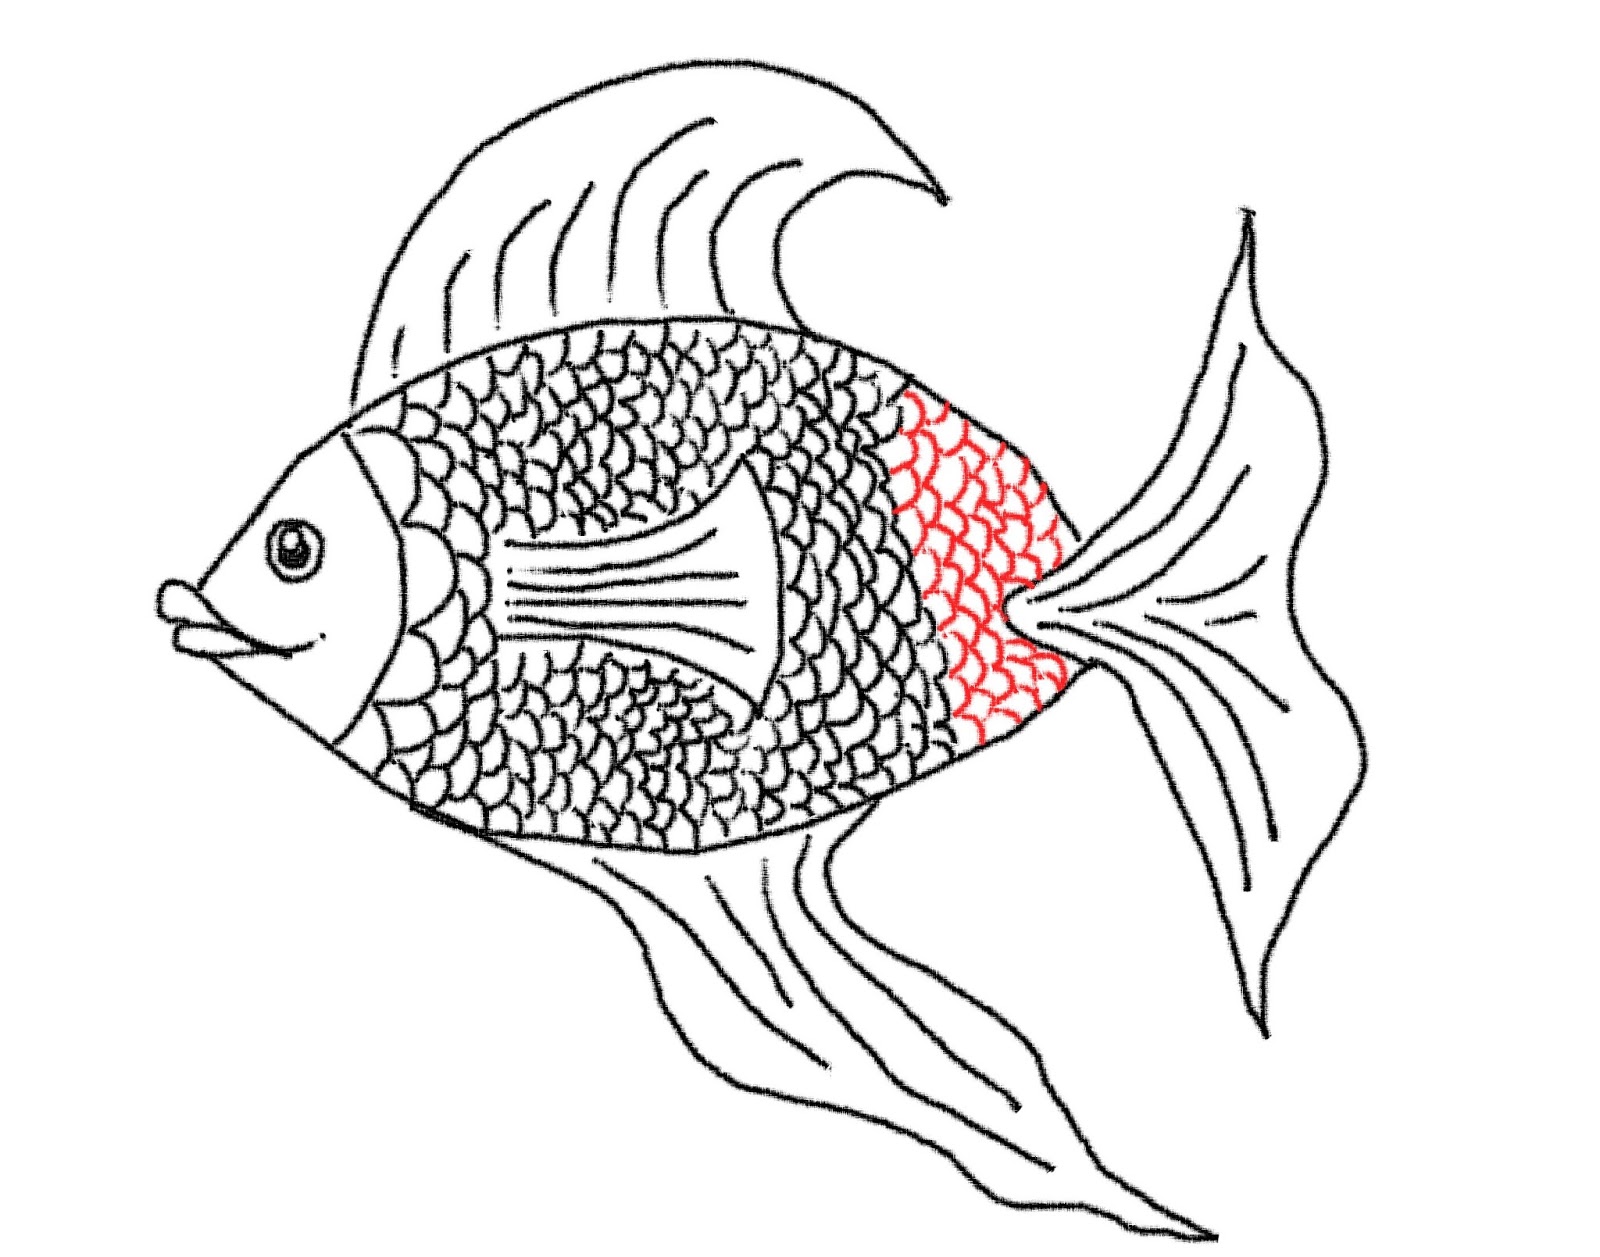 Cartoon Fish Sketch Drawings with simple drawing